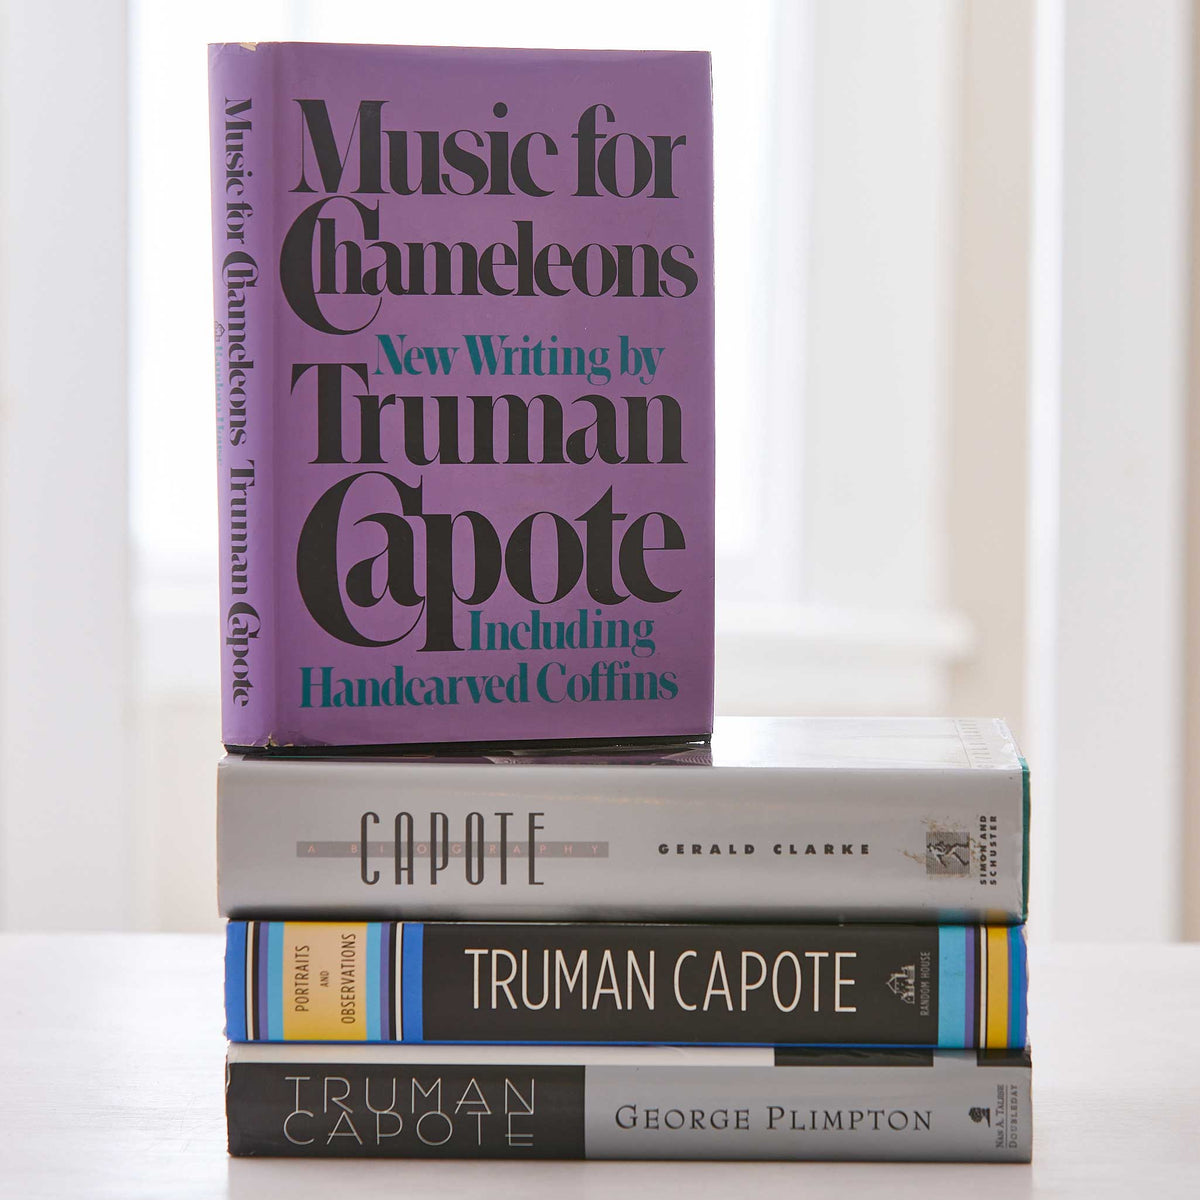 CAPOTE, A BIOGRAPHY